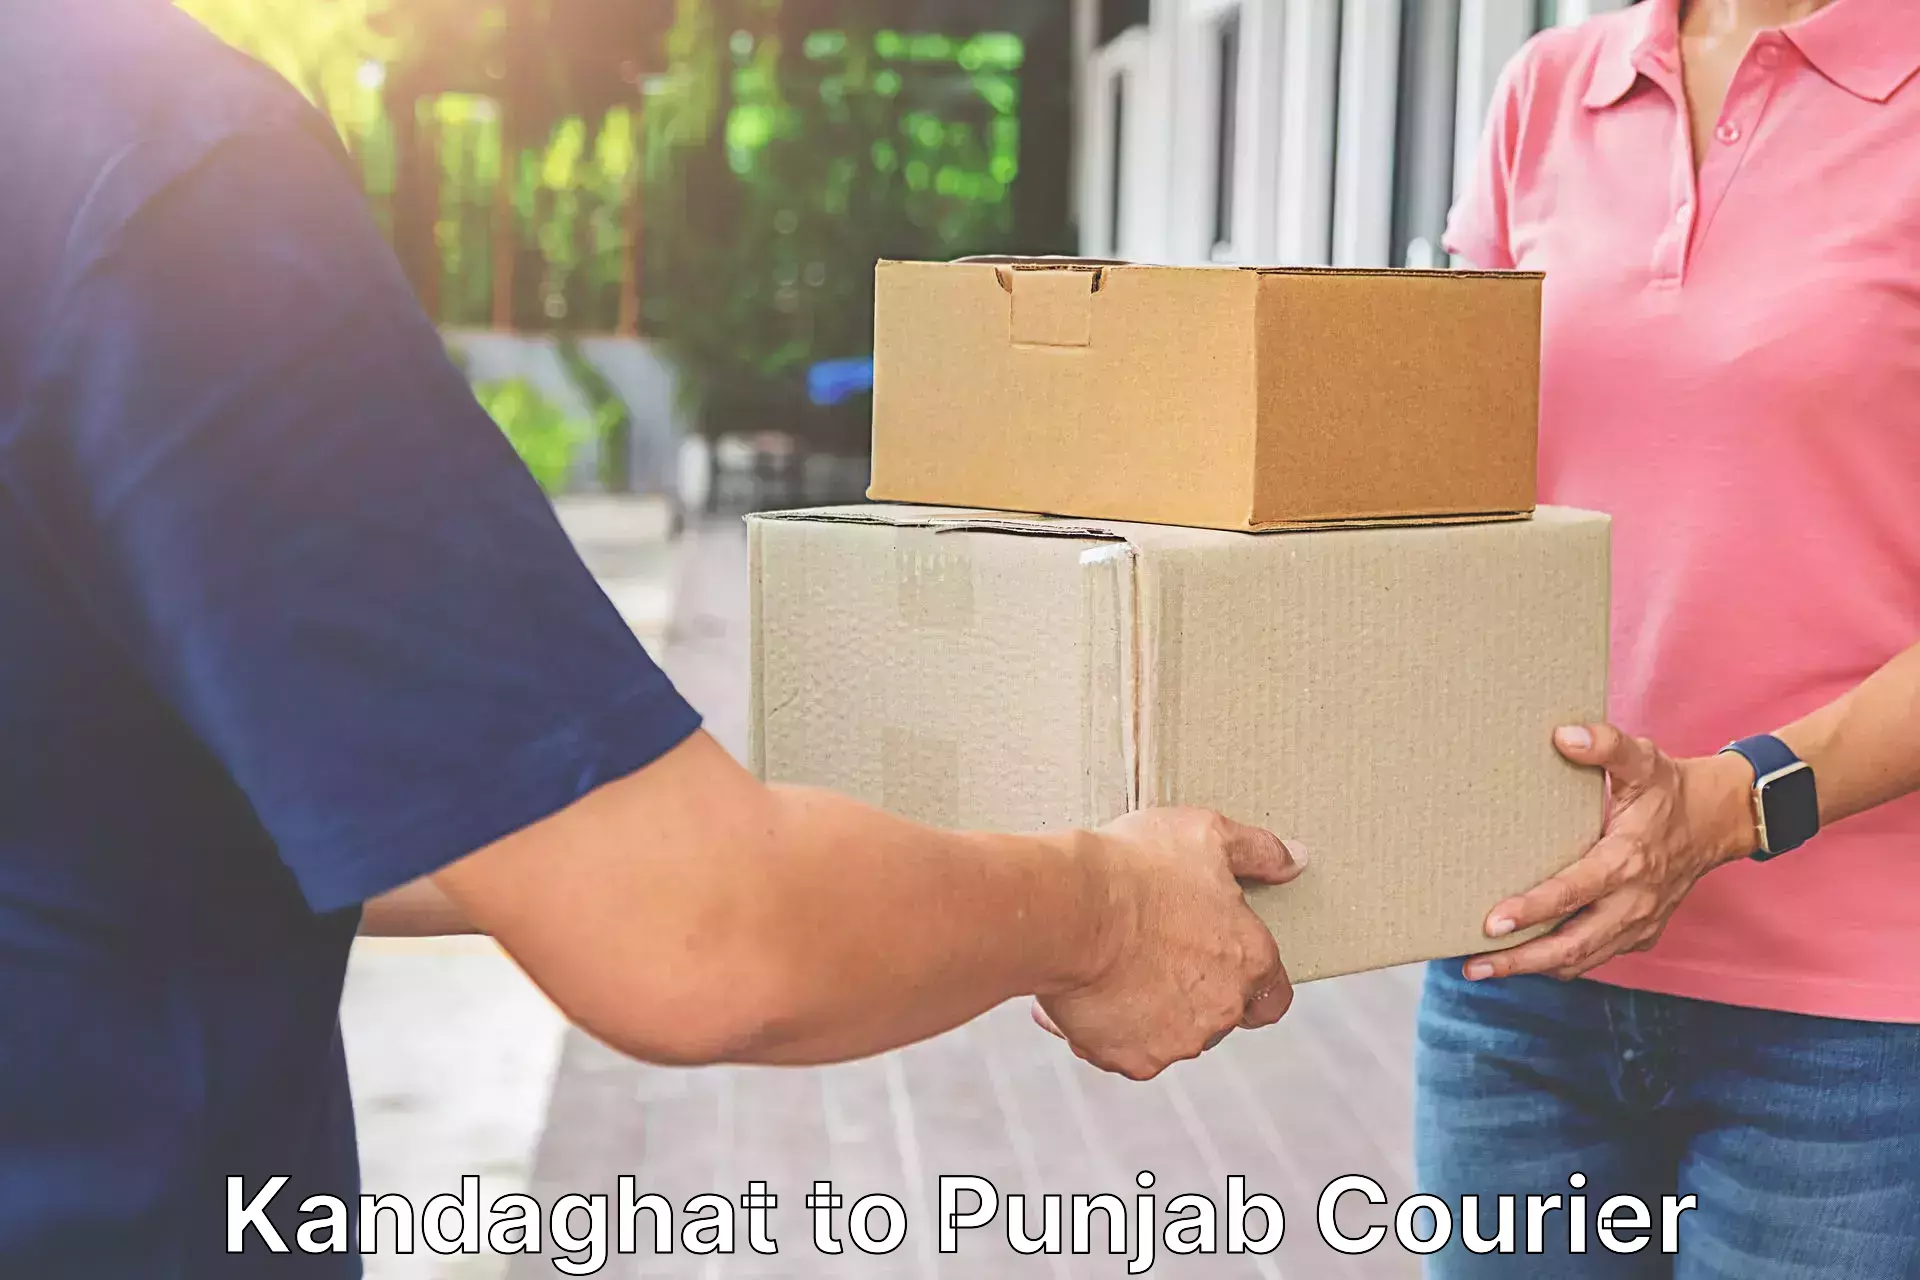 Round-the-clock parcel delivery Kandaghat to Abohar